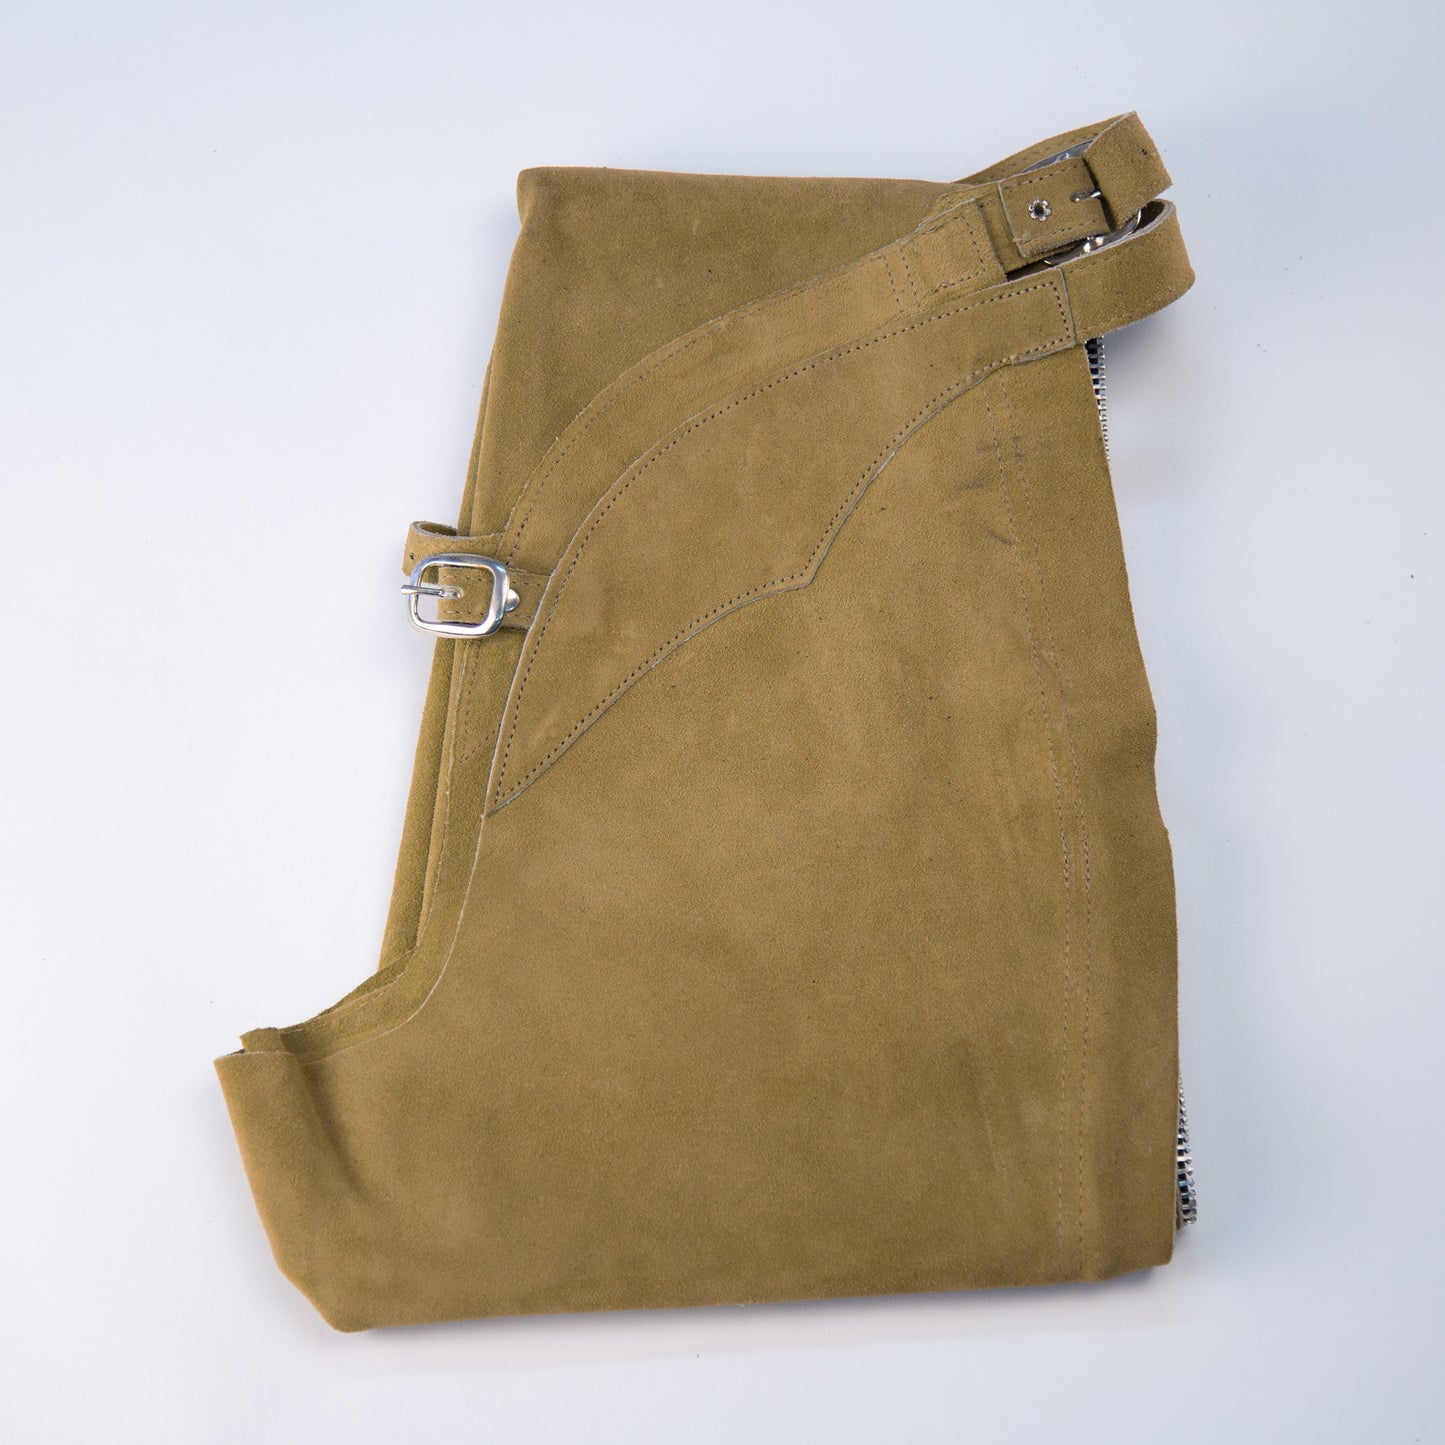 English Schooling Chaps - Taupe Suede